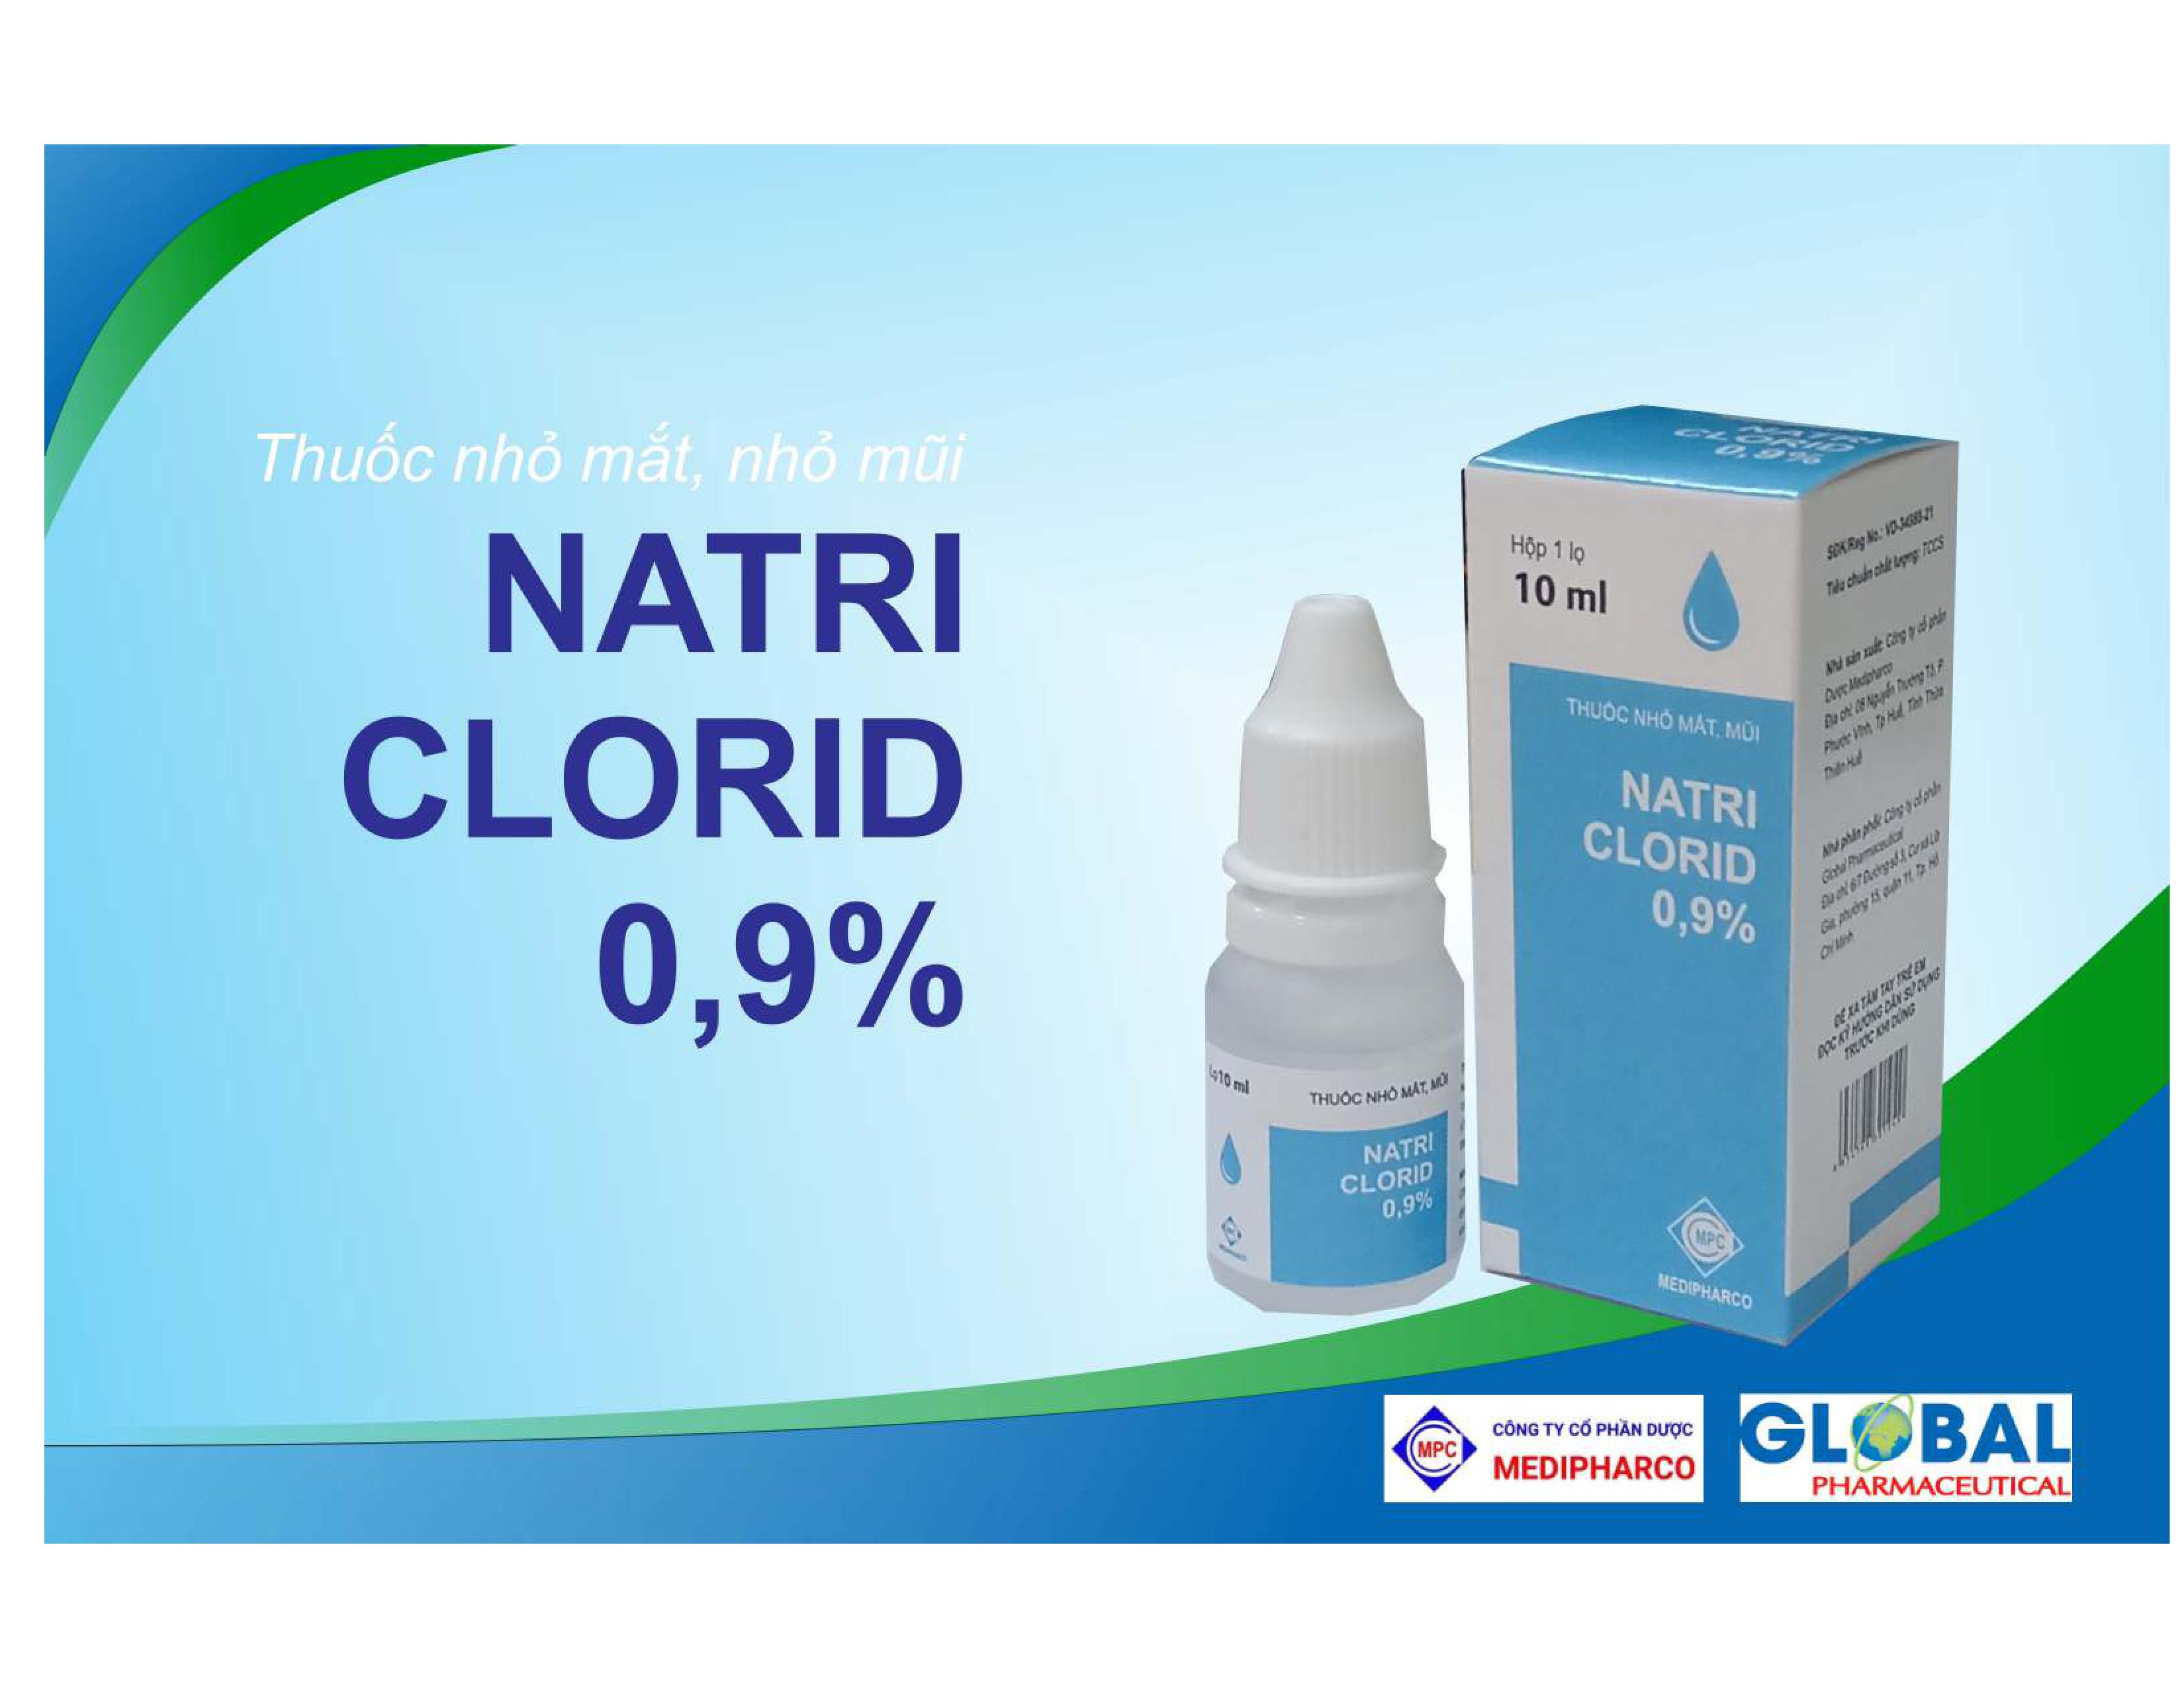 NATRI CLORID 0.9% - Sodium chloride for rinsing the eyes and nose